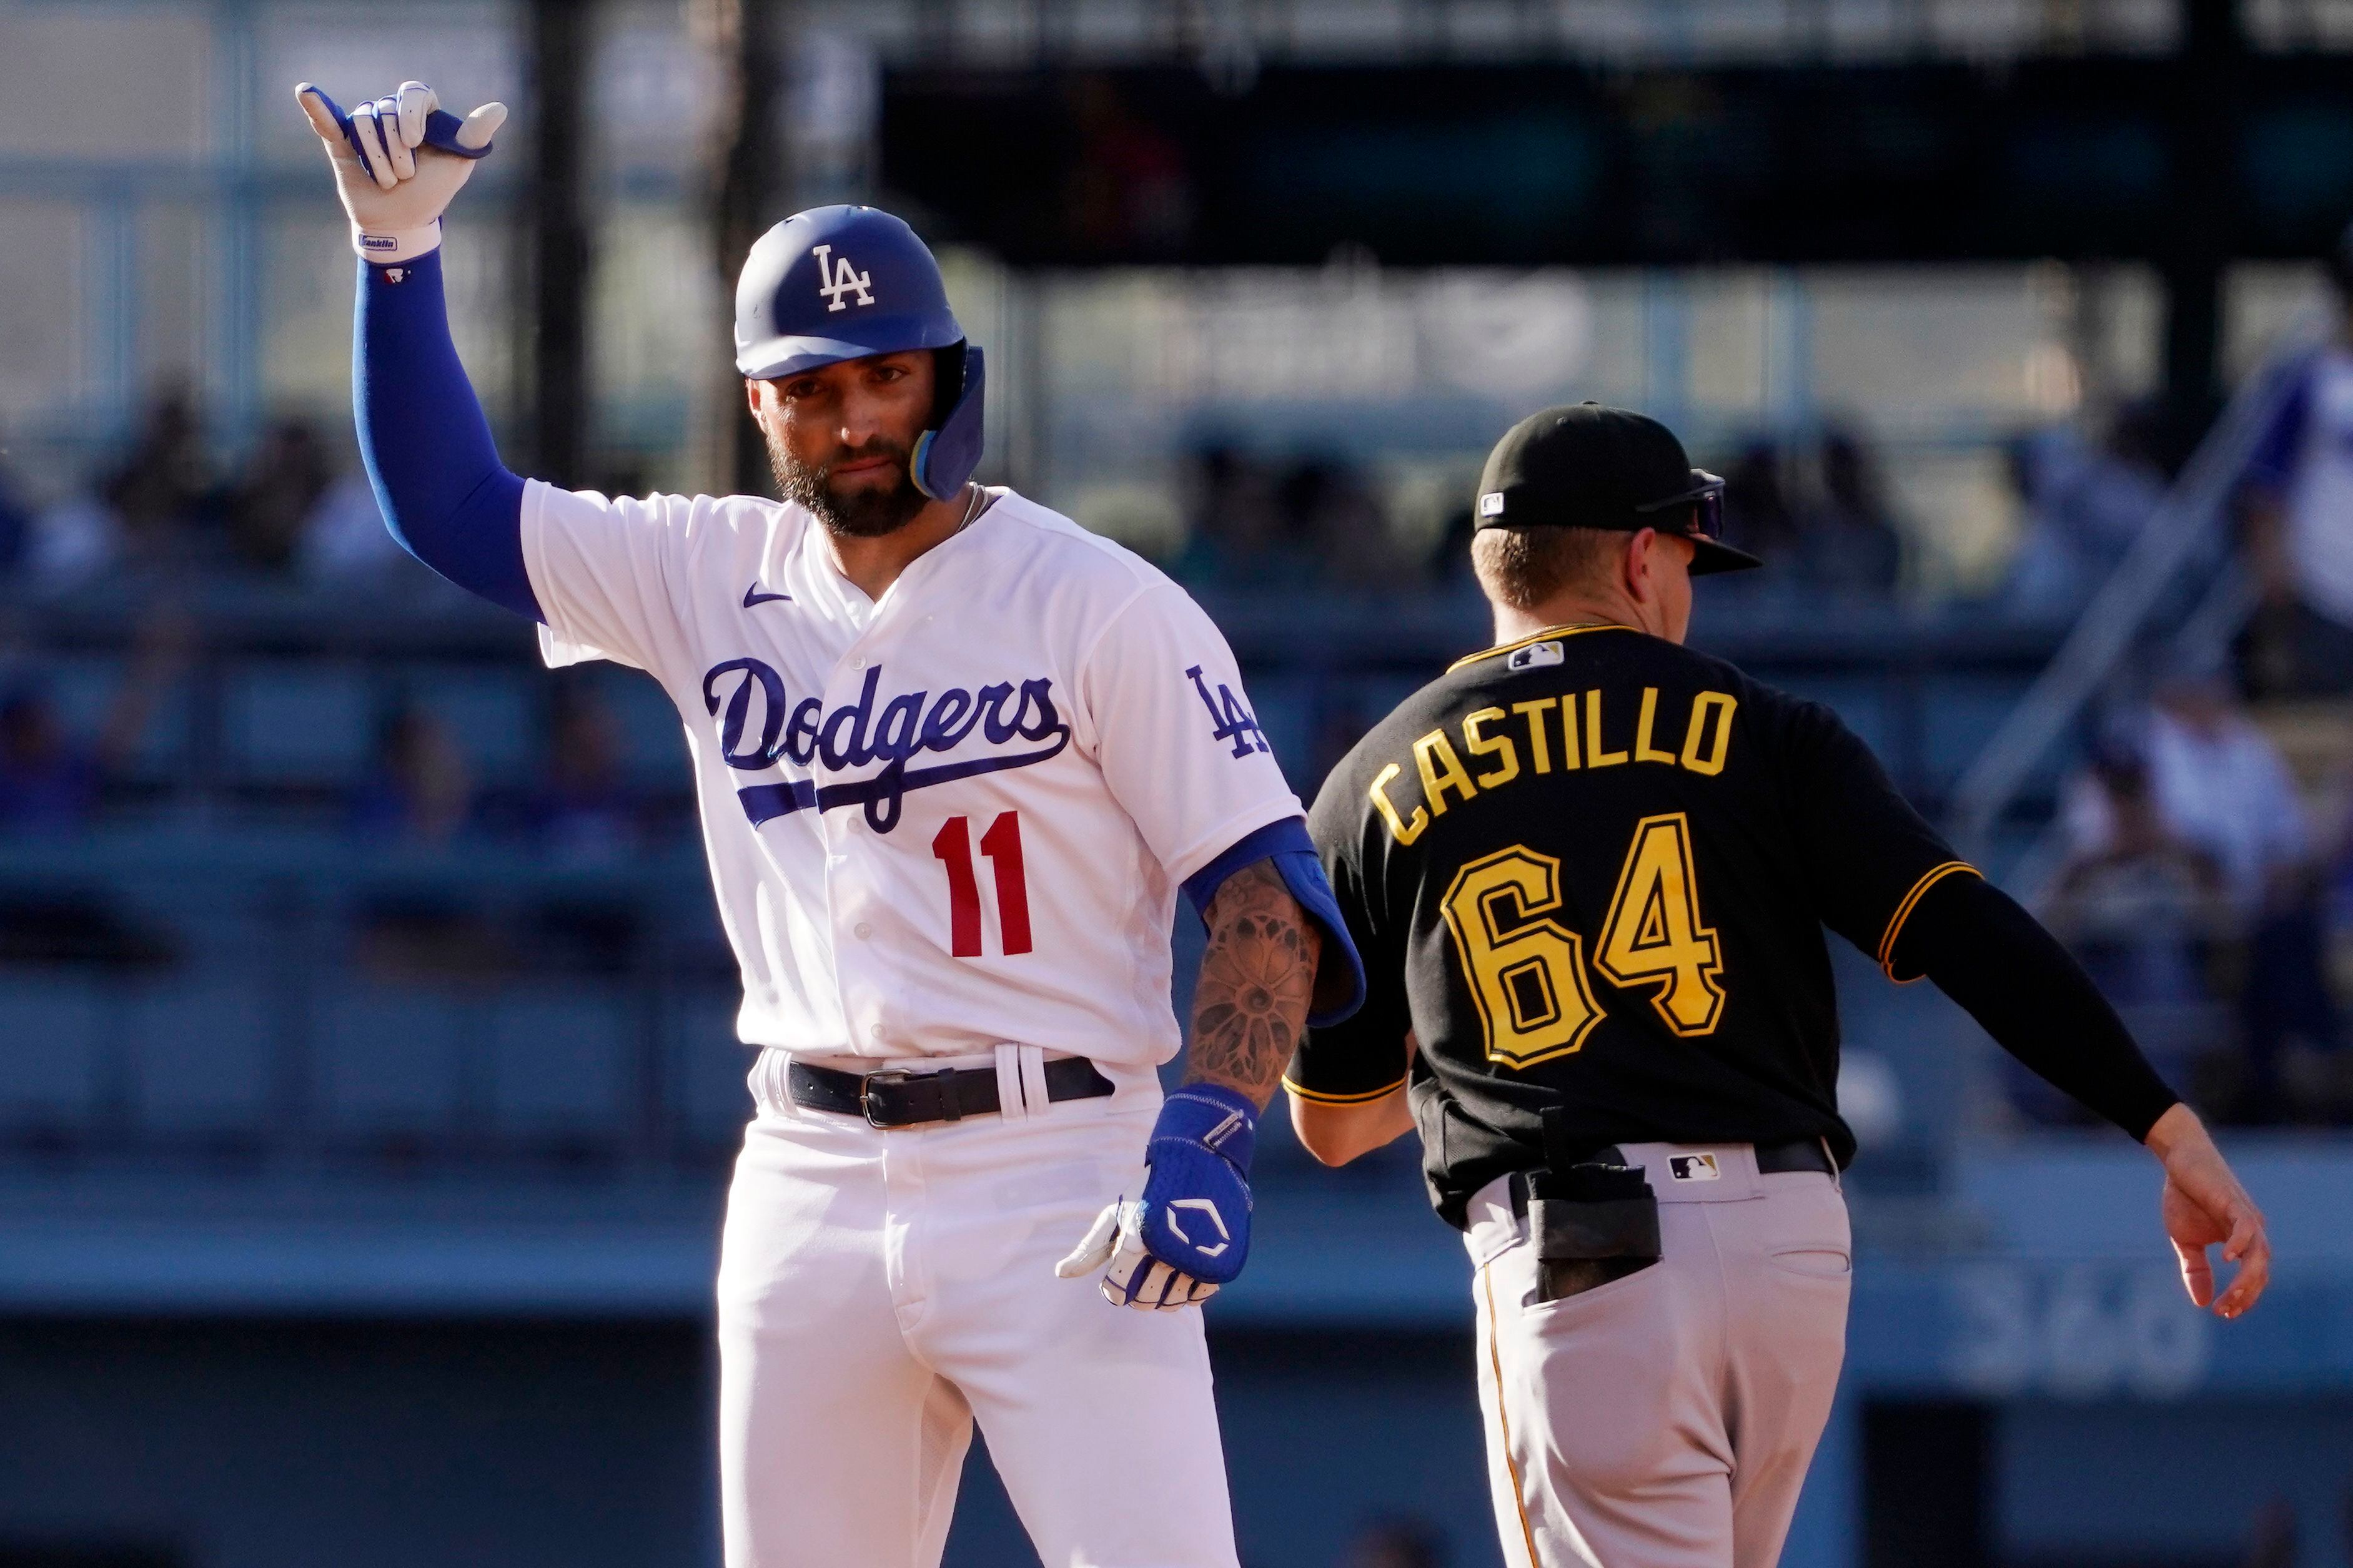 Cleaning up: Pirates beat Dodgers 8-4 for rare sweep in LA